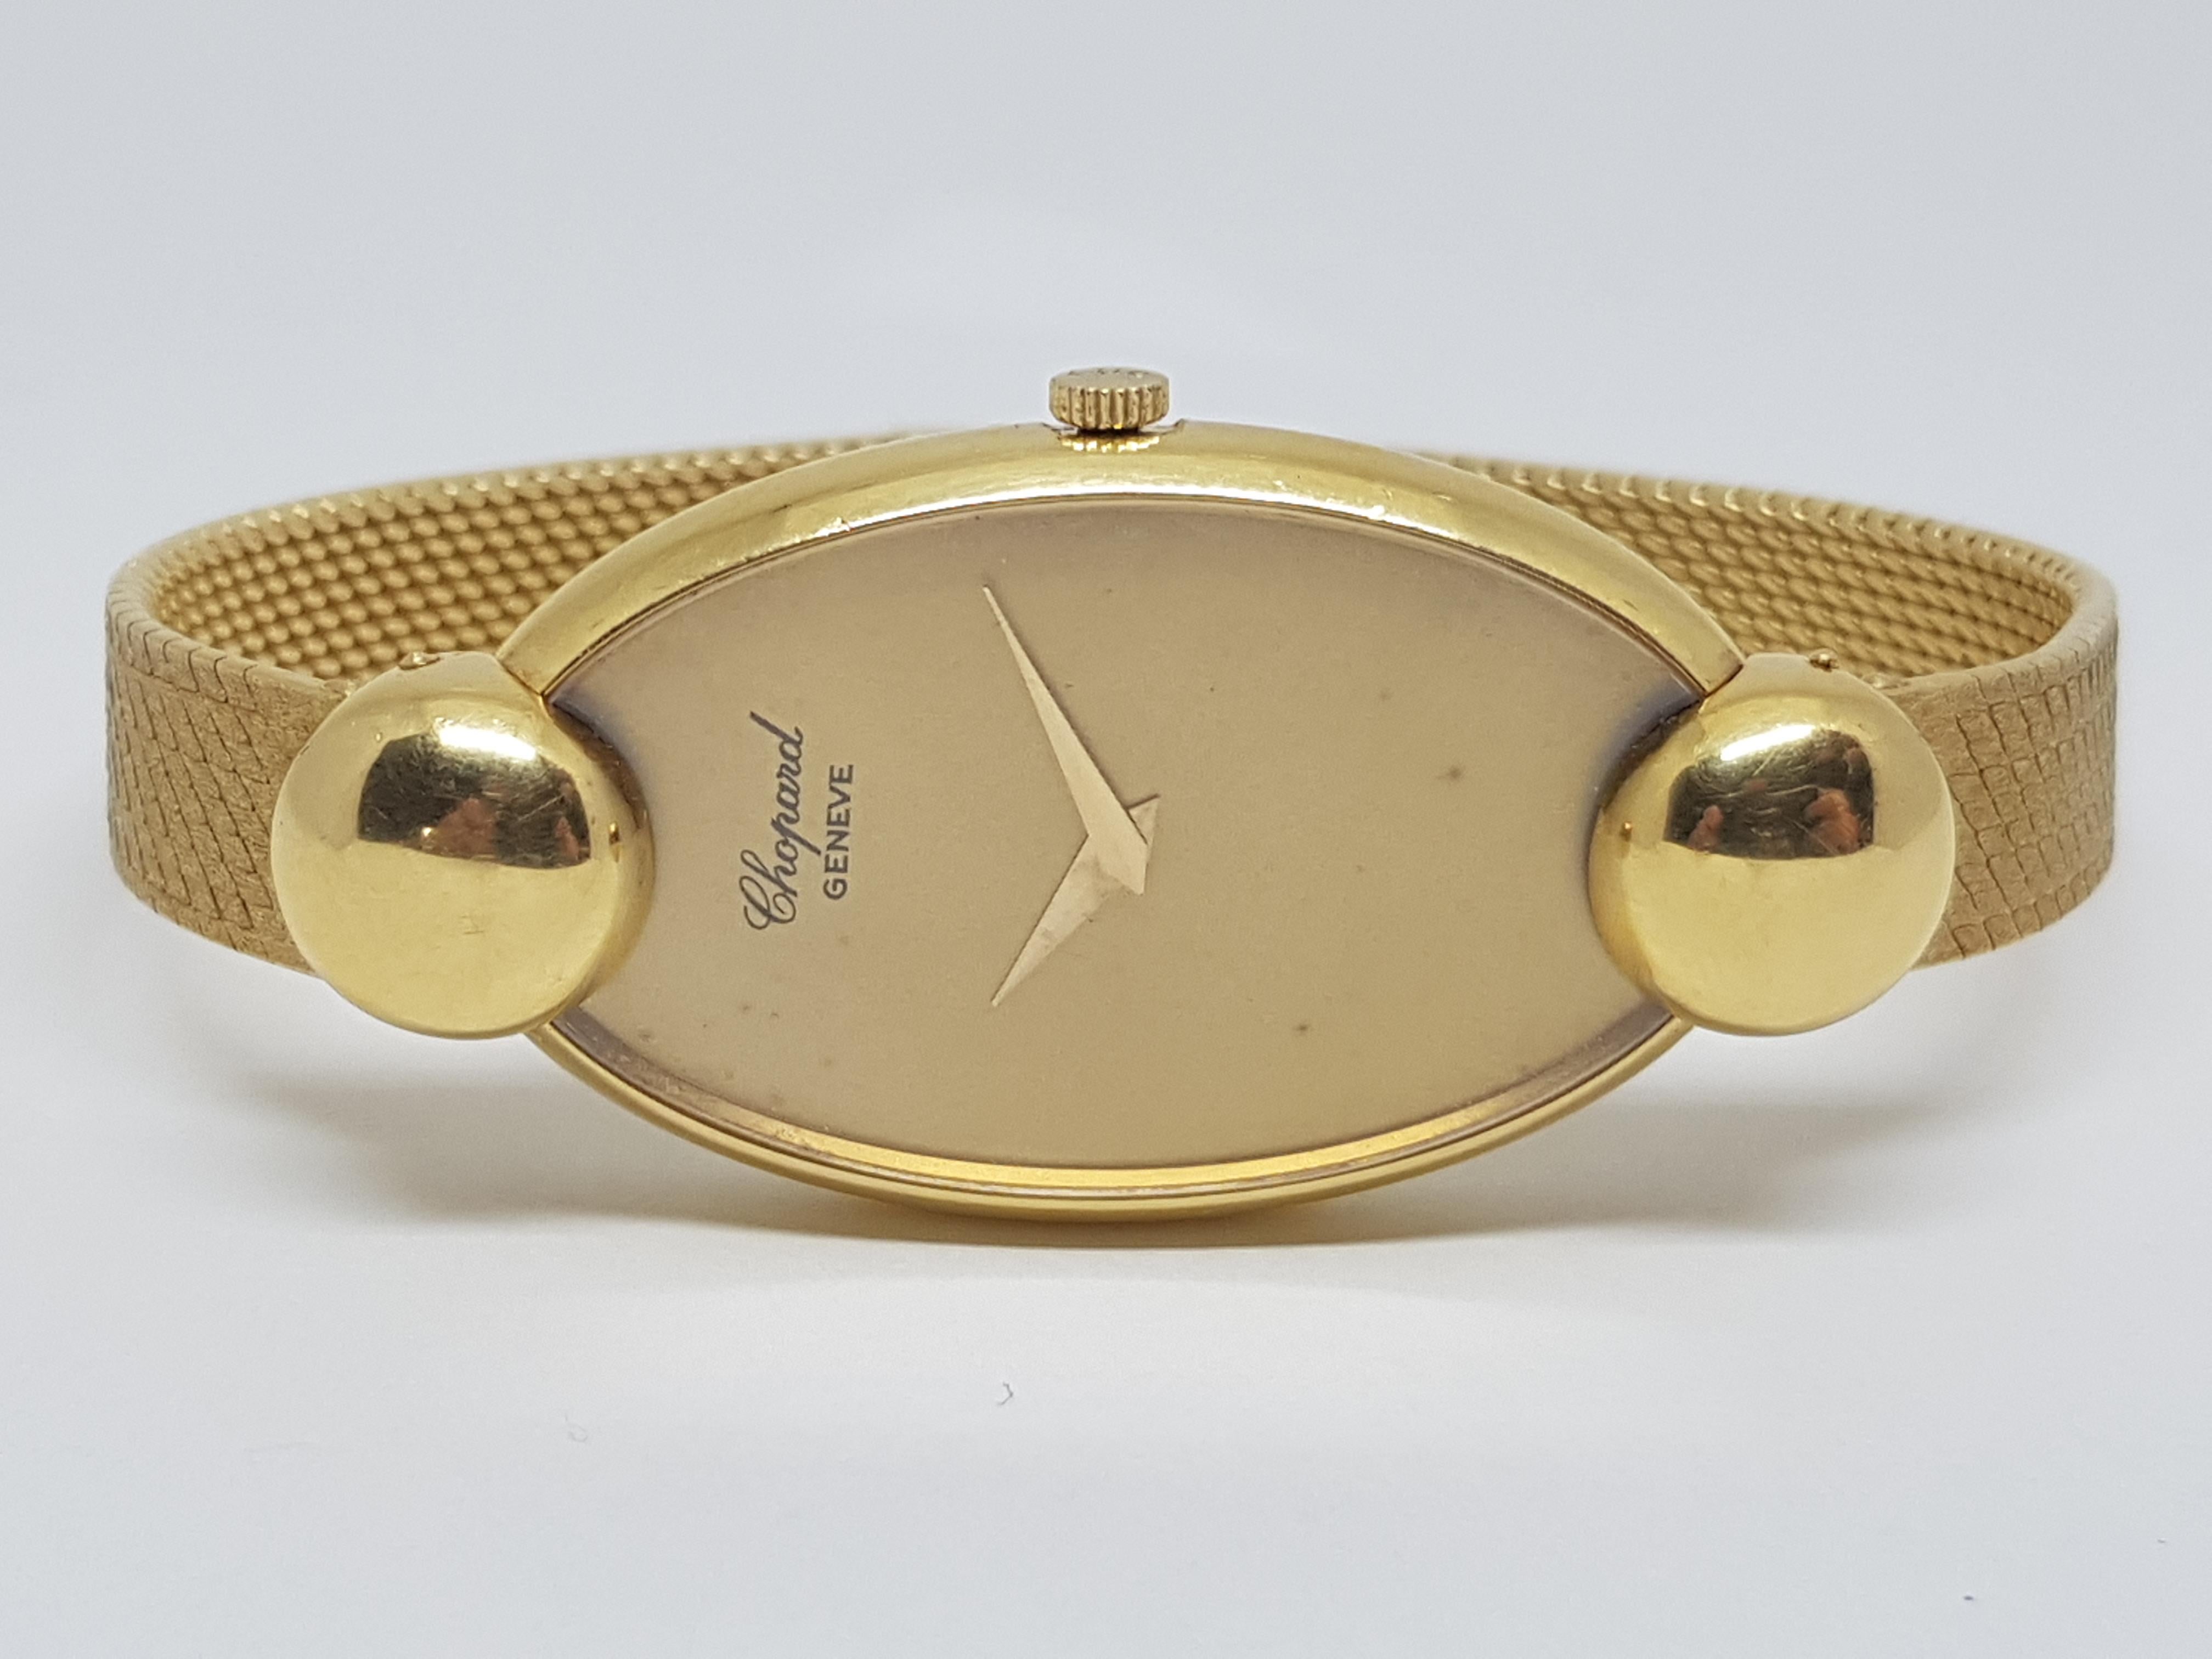 Brand: Chopard ref: 48570 5038 1
Gold: 18 K yellow gold
Gold dial
Mechanical Movement
Weight: 64,01 grams.
Diameter with crown: 29mm
Age: ca. 1960-1970
Length: 18,5cm. 
Free lengthening of watch band up to size 21,0cm.
Gold Clasp
All our jewellery